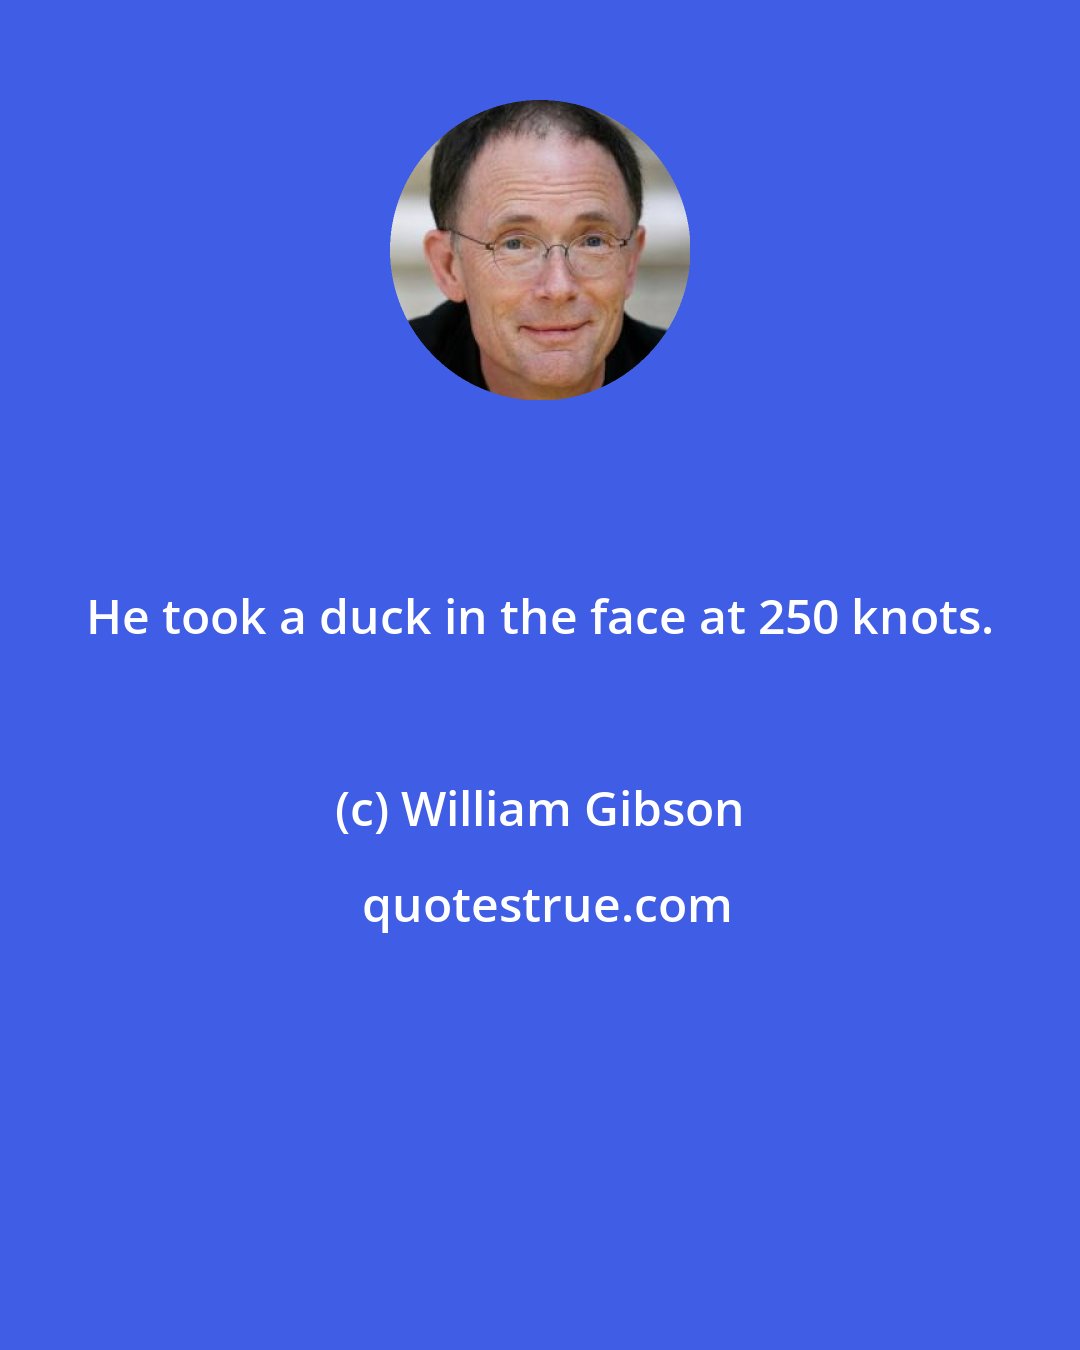 William Gibson: He took a duck in the face at 250 knots.